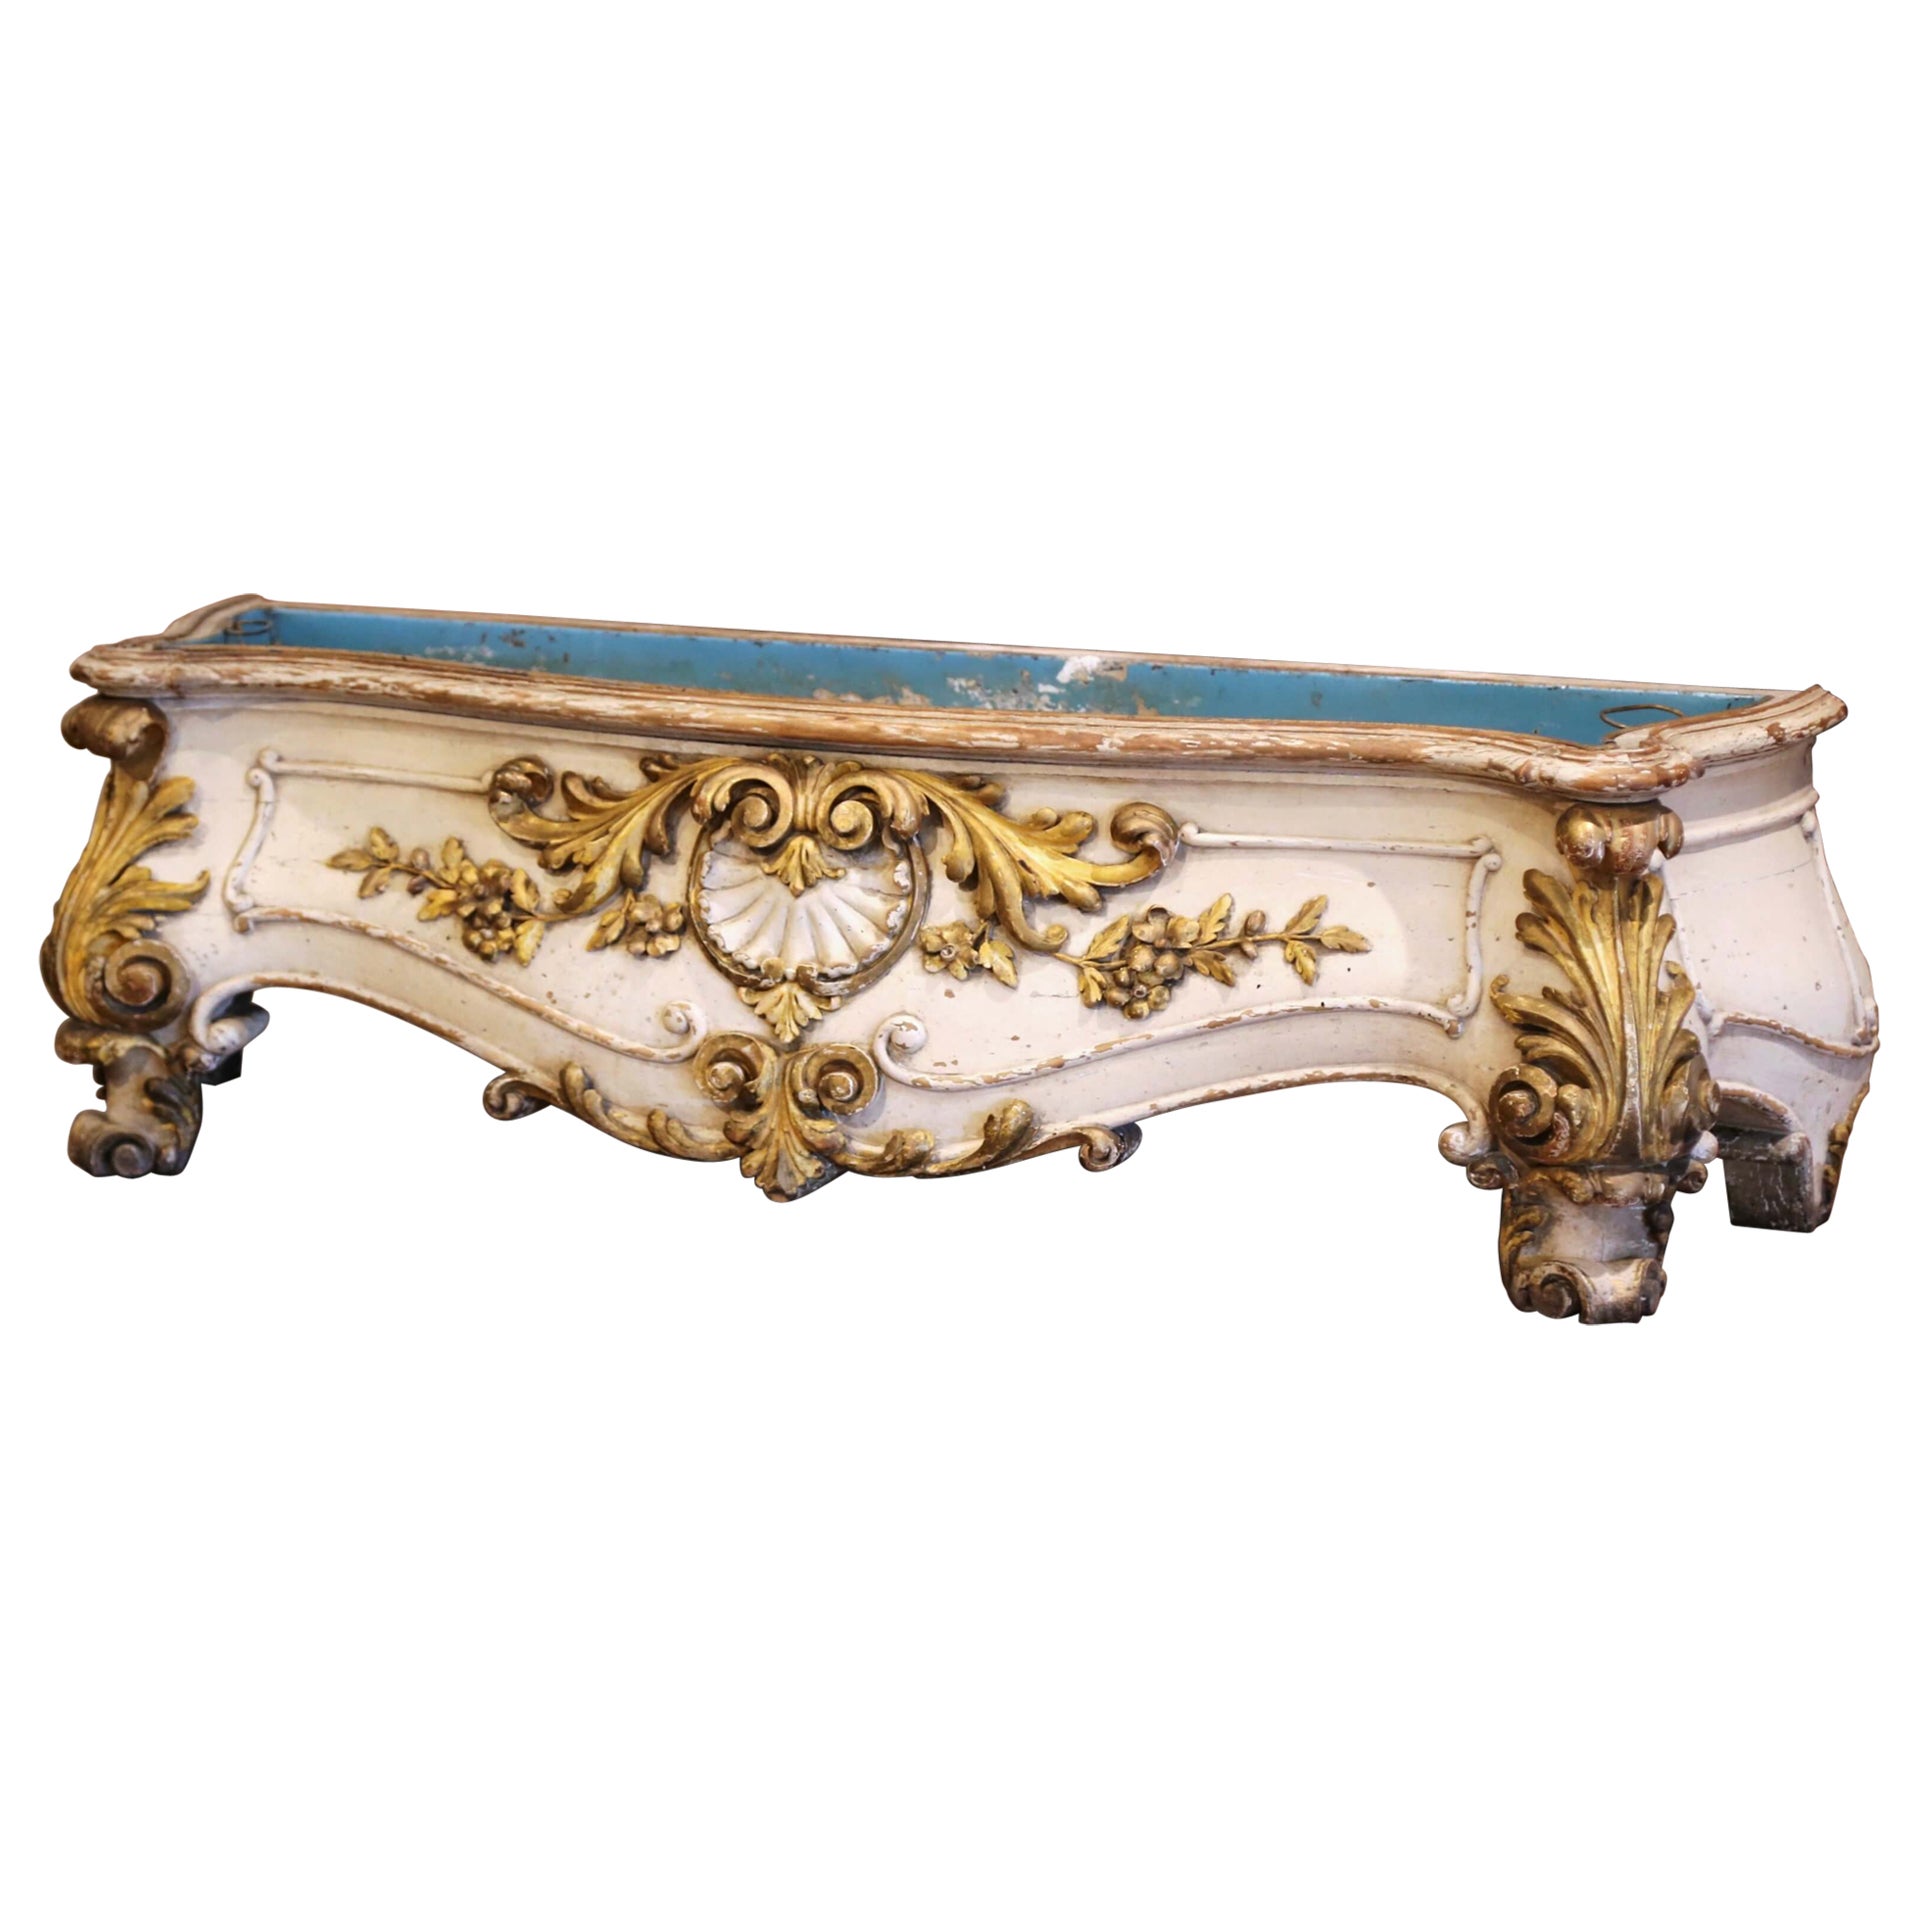 Early 19th Century, French Louis XV Carved Painted & Gilt Bombe Floor Jardinière For Sale